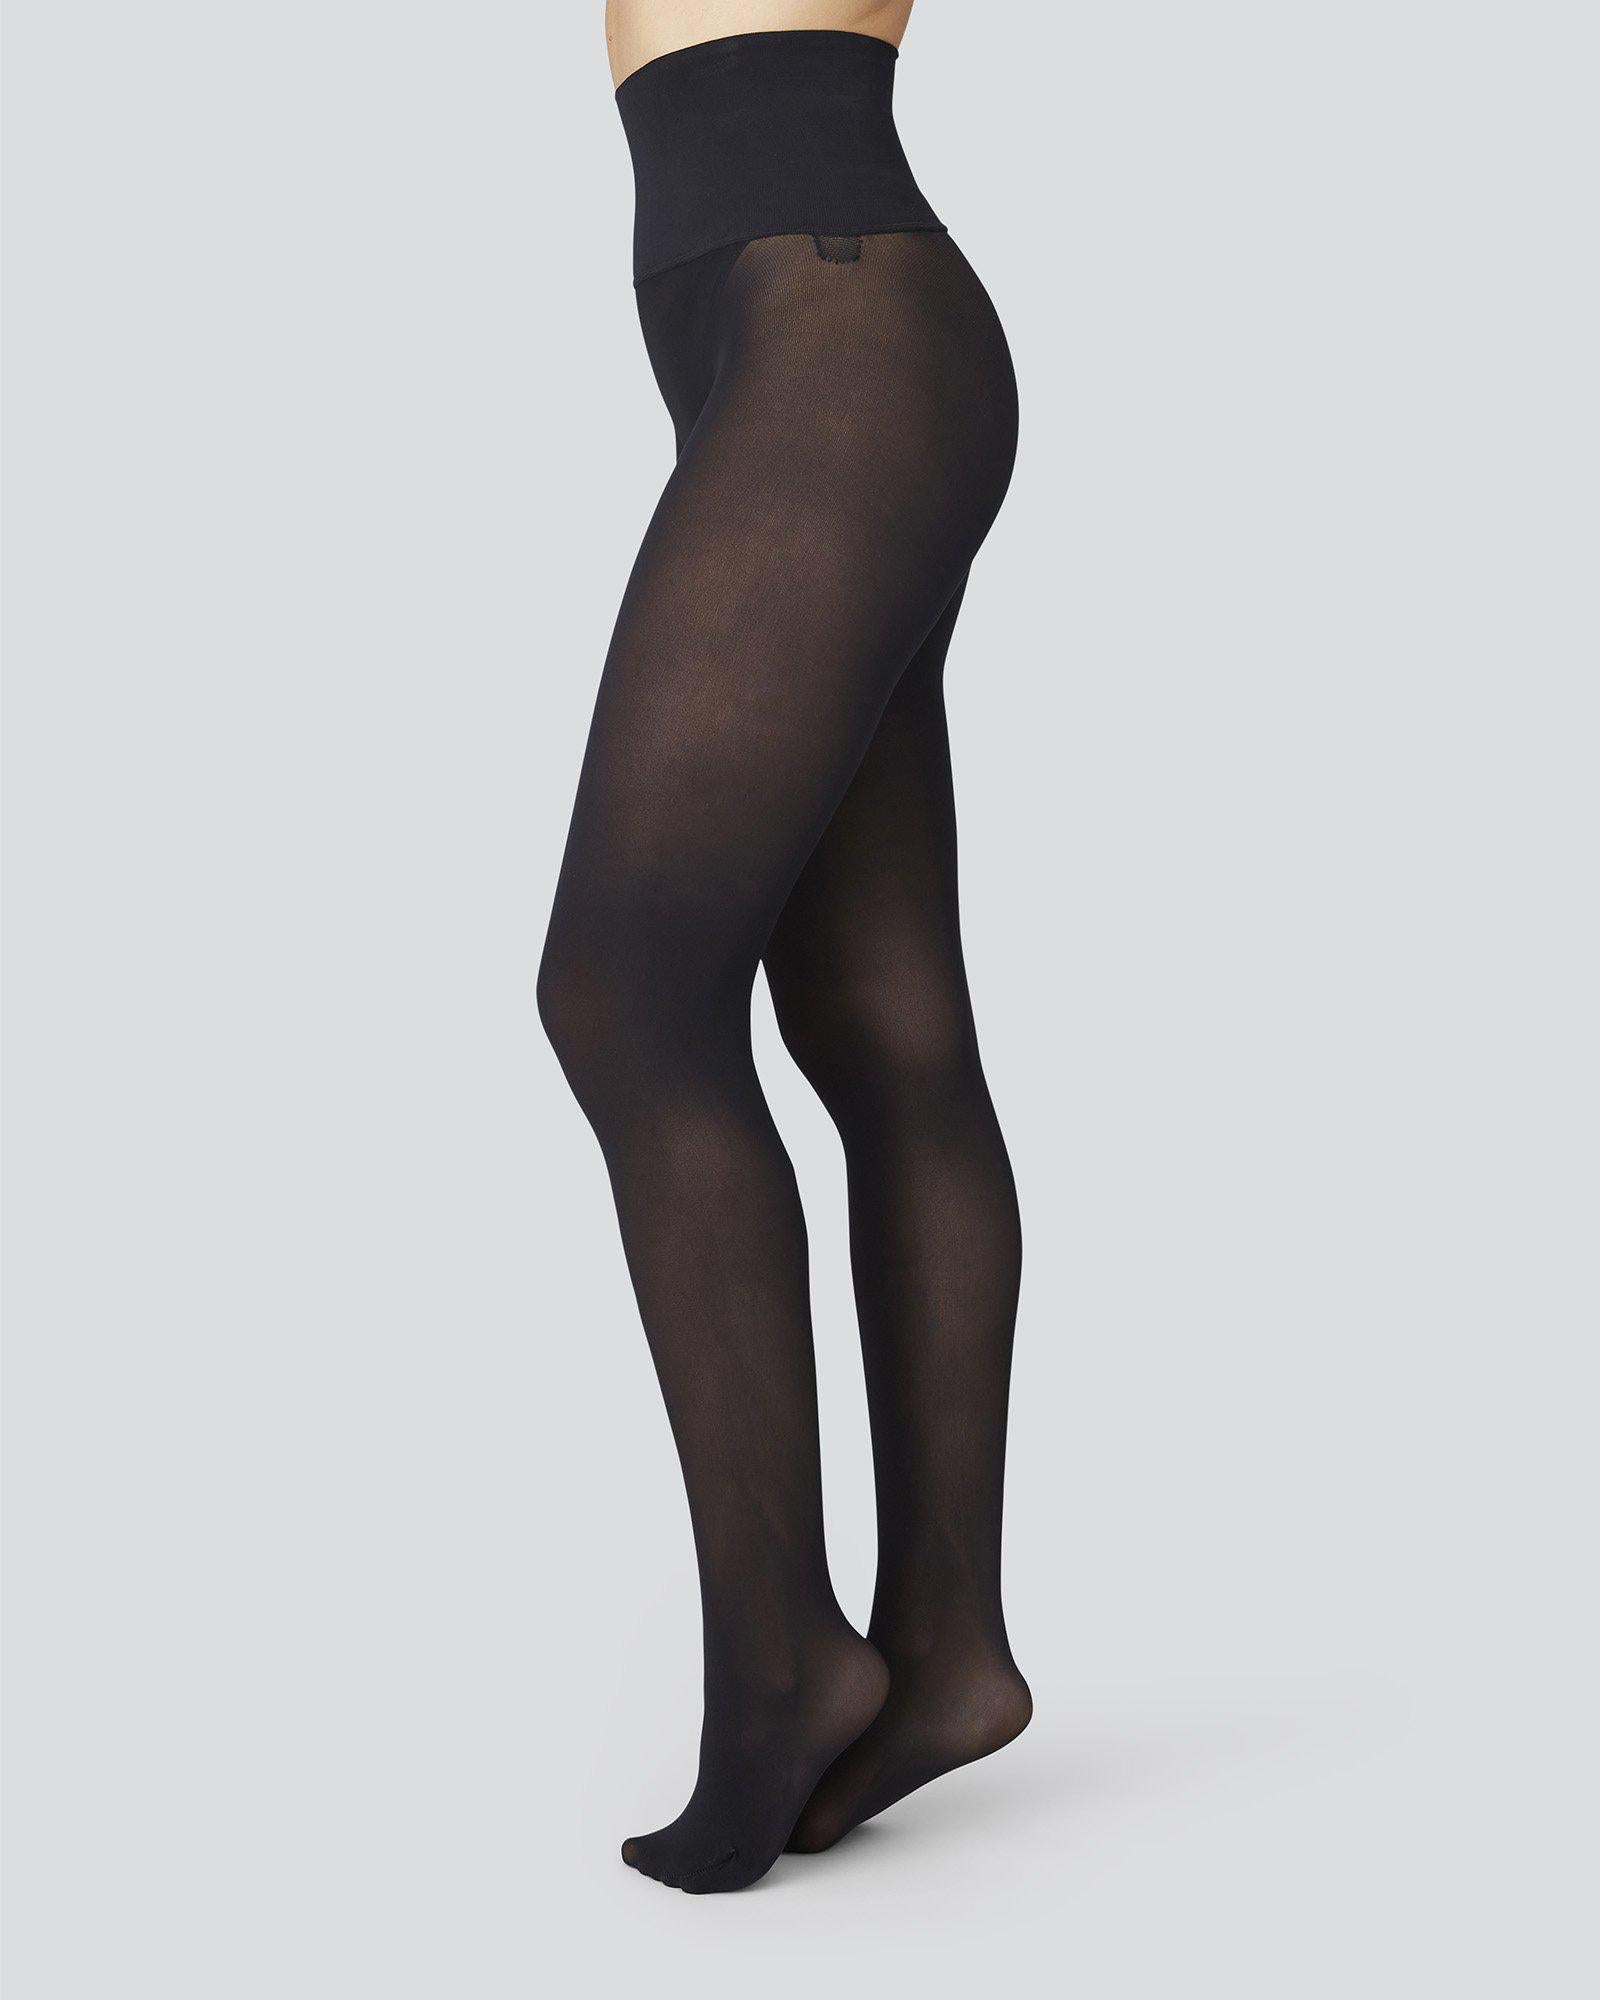 Buy Black Seamless 60 Denier Tights One Pack from Next Germany